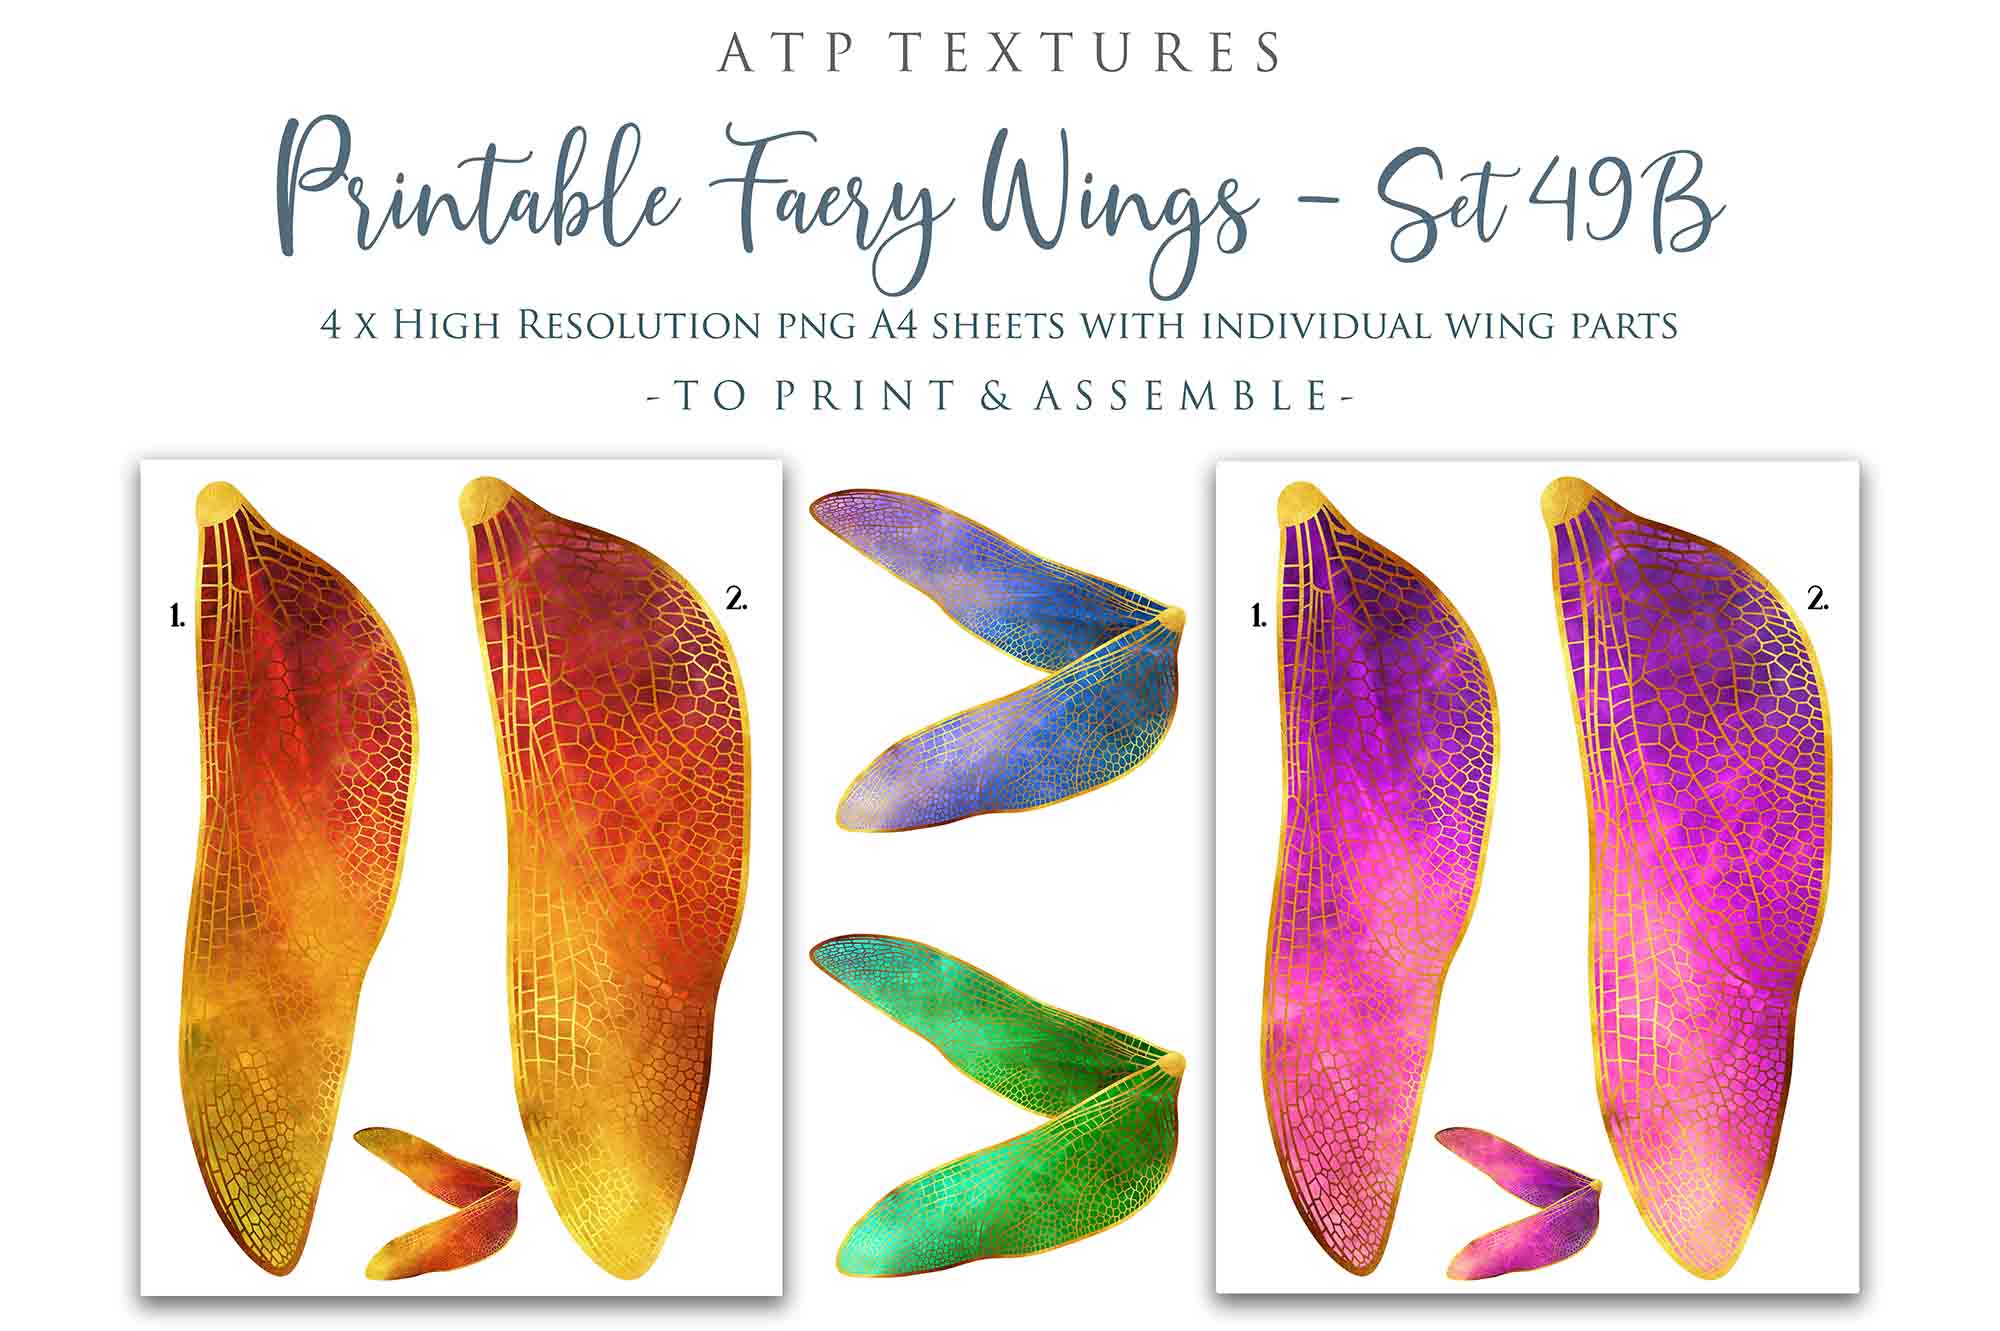 PRINTABLE FAIRY WINGS - Set 49 - Gold